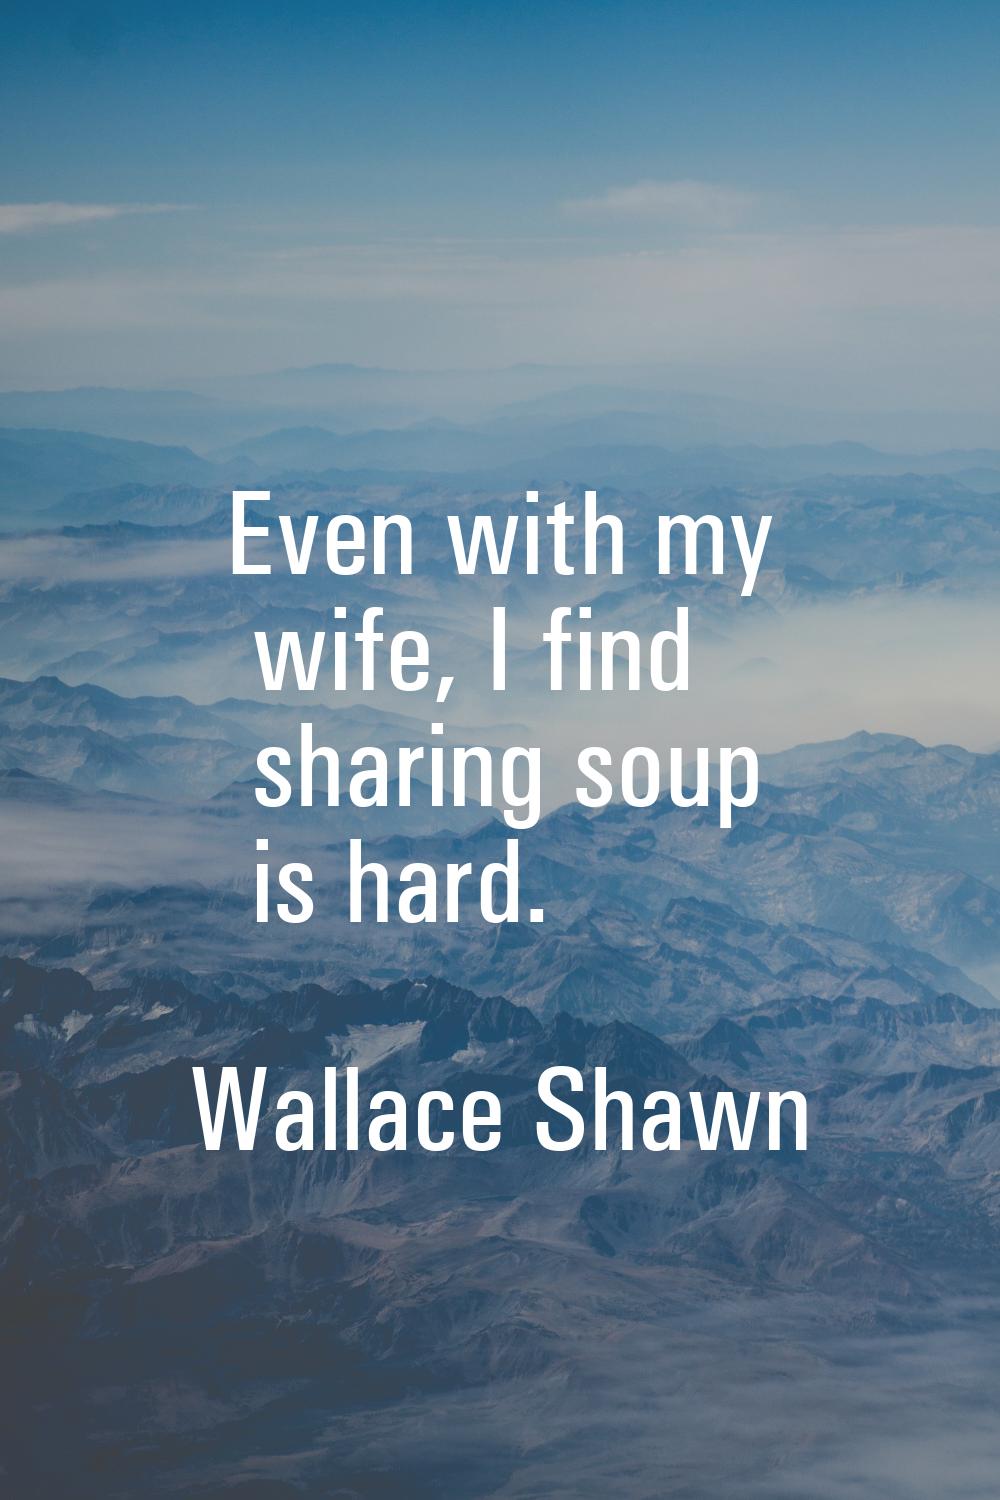 Even with my wife, I find sharing soup is hard.